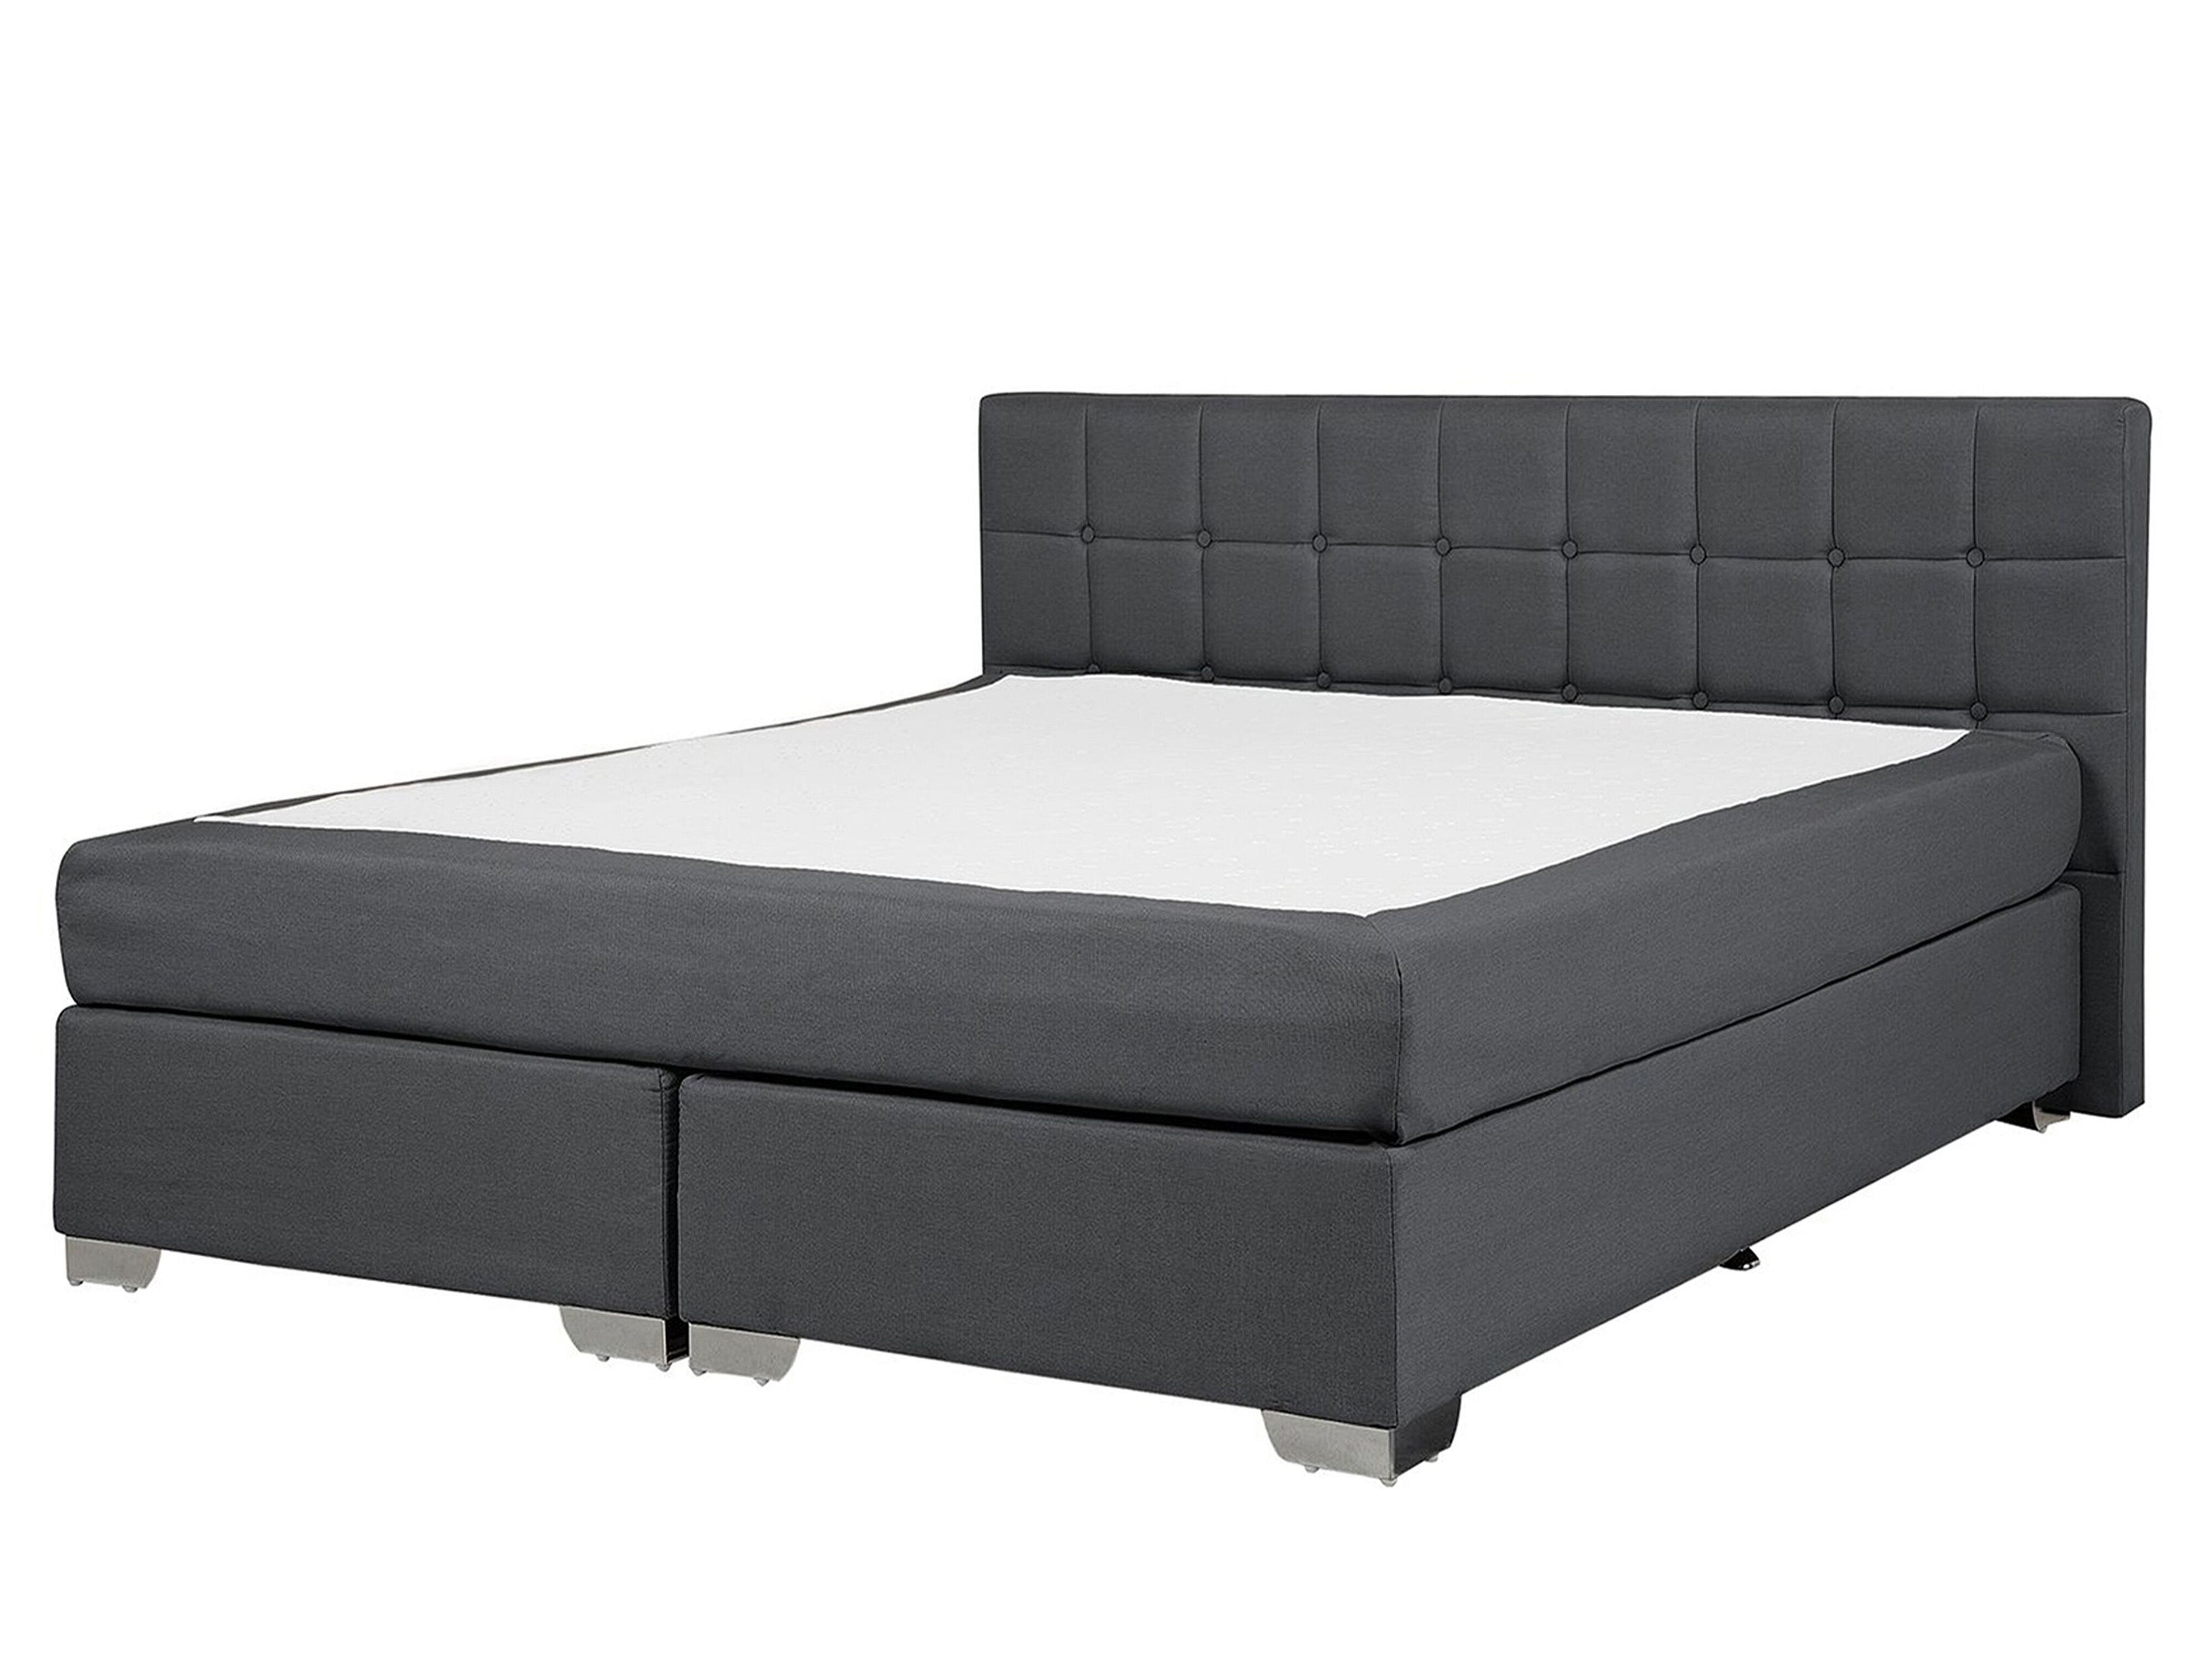 Fabric EU King Size Divan Bed Dark Grey ADMIRAL - Furniture, lamps &  accessories up to 70% off